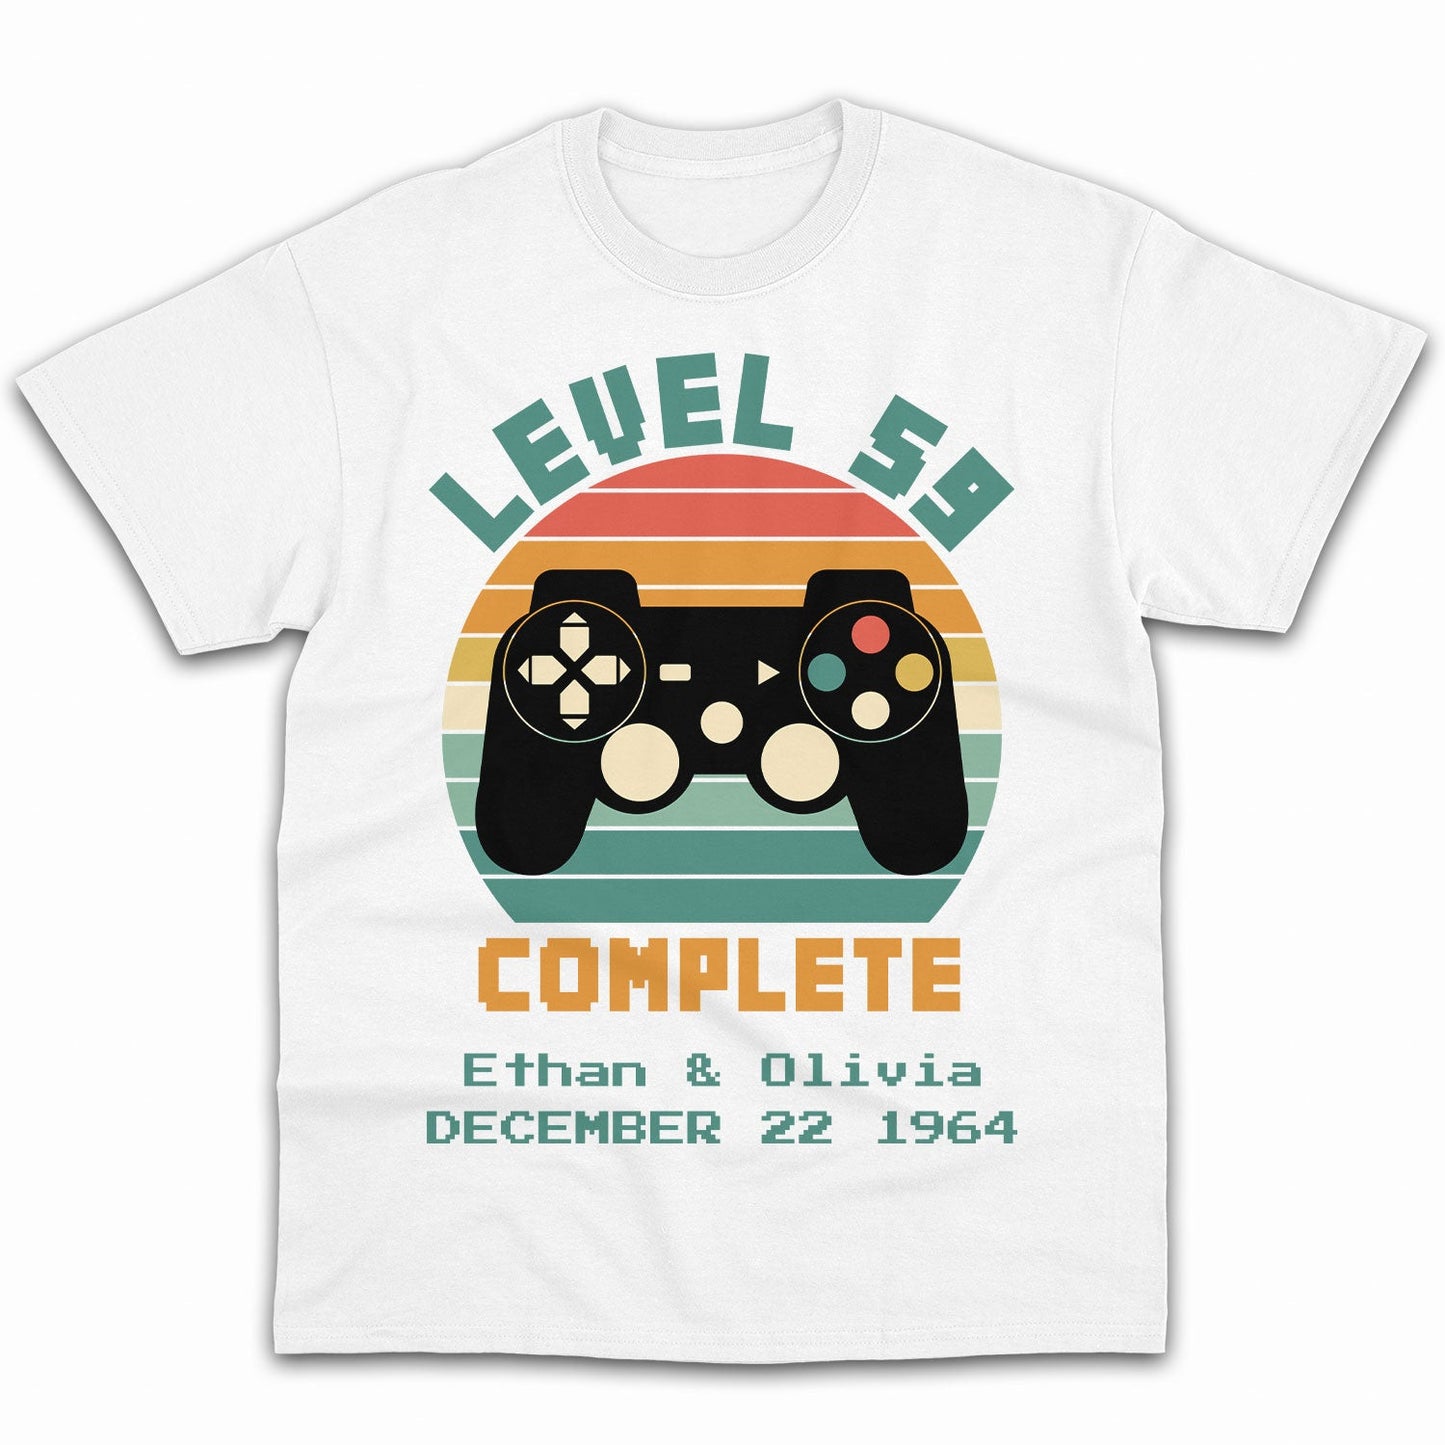 Level 59 Complete - Personalized 59 Year Anniversary gift for him for her - Custom Tshirt - MyMindfulGifts